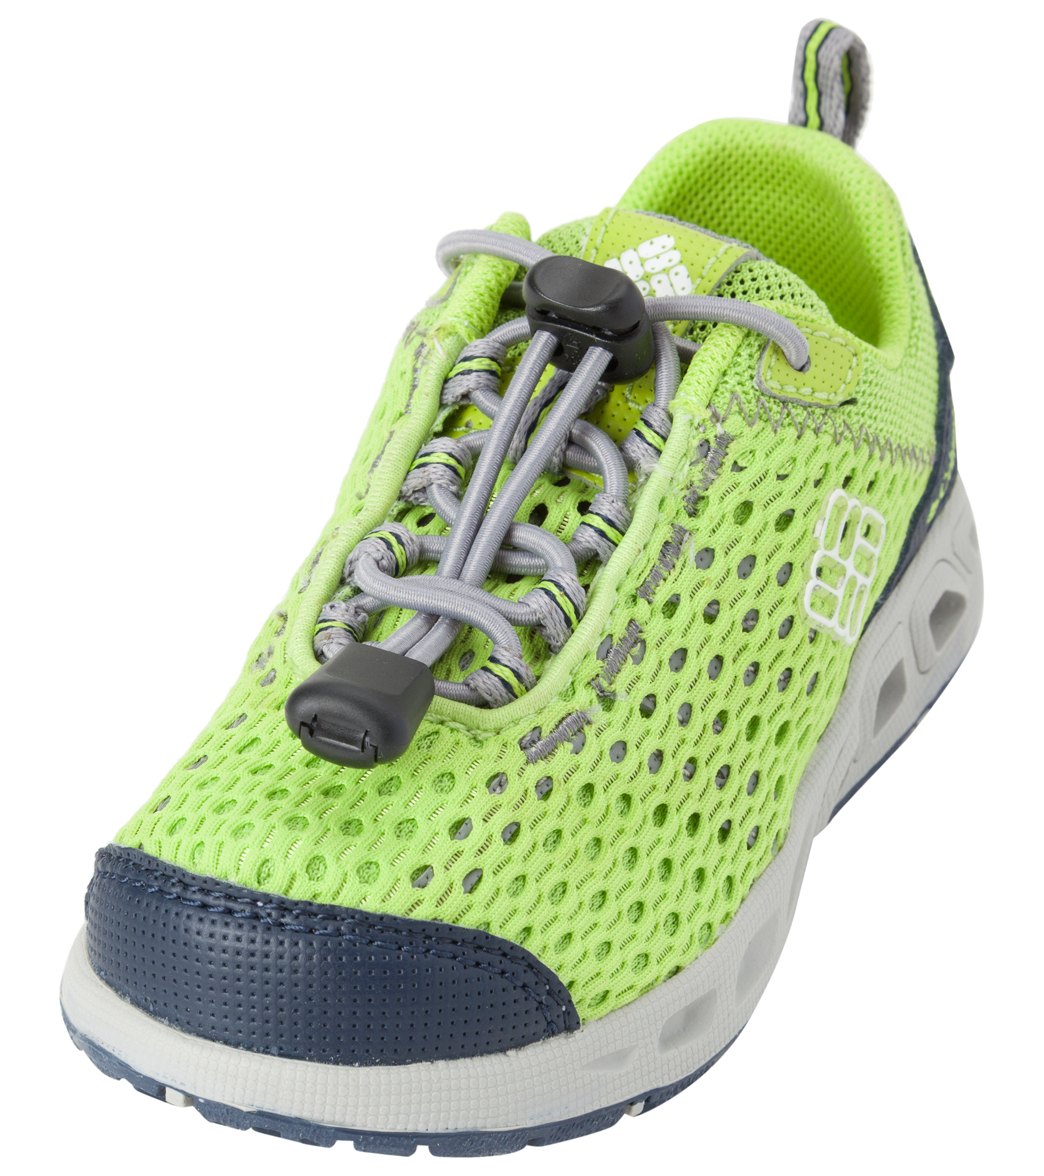 Columbia Kids' Drainmaker Iii Water Shoes - Fission/Sea Salt 8 Rubber - Swimoutlet.com